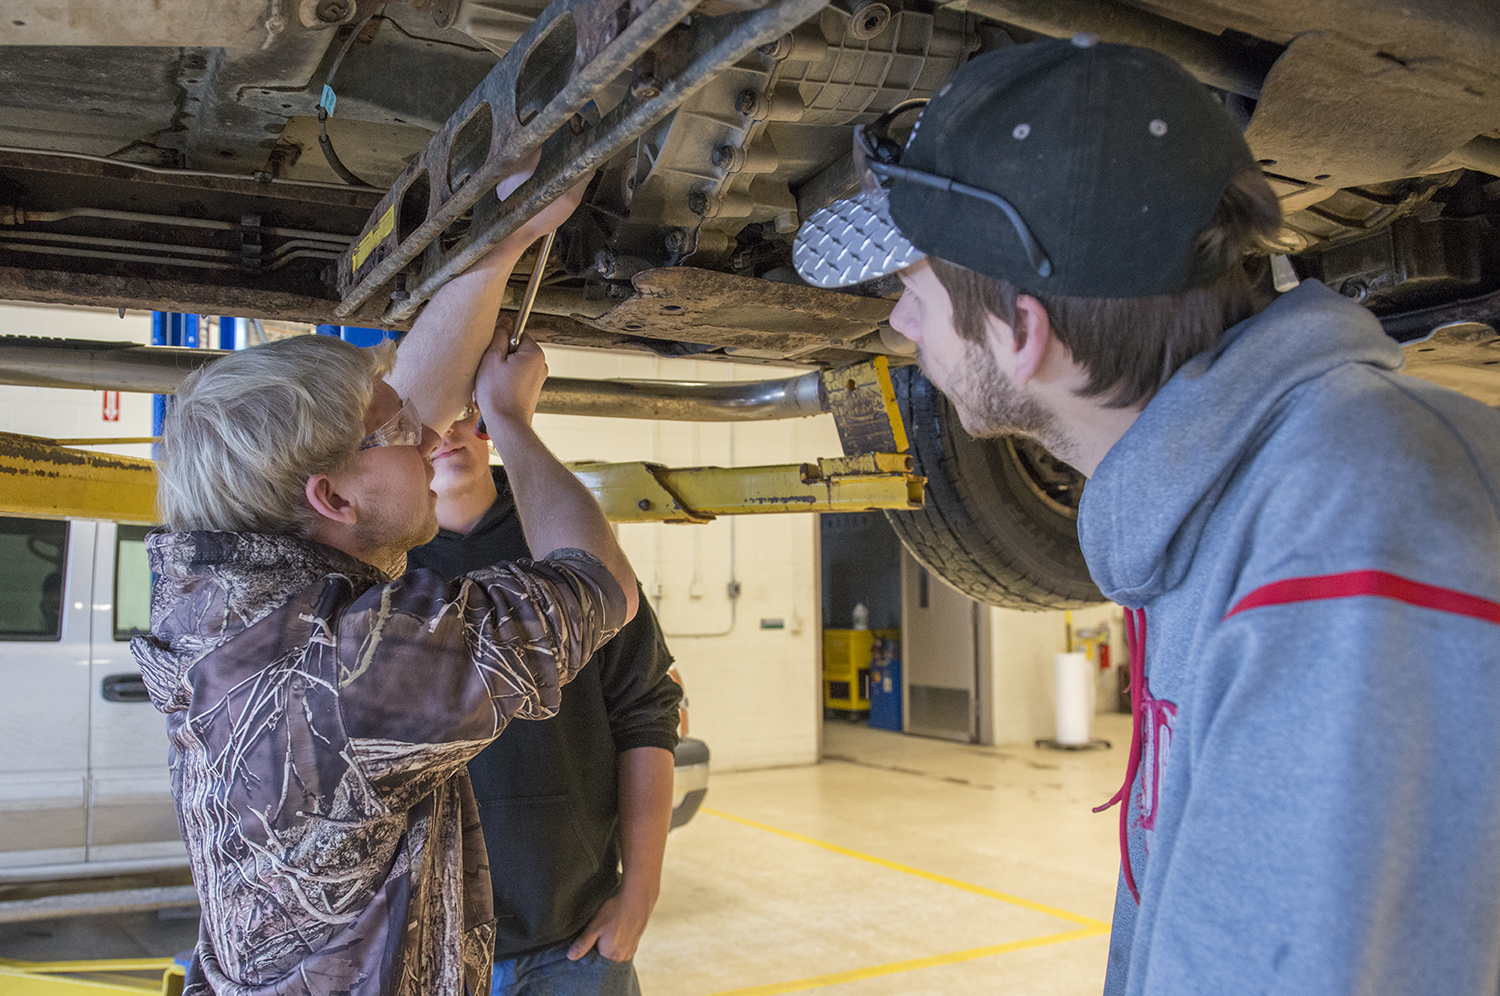 NTC’s Automotive Service and Performance program held a car winterization clinic for the Bemidji community in conjunction with the Day of Giving and local sponsors.